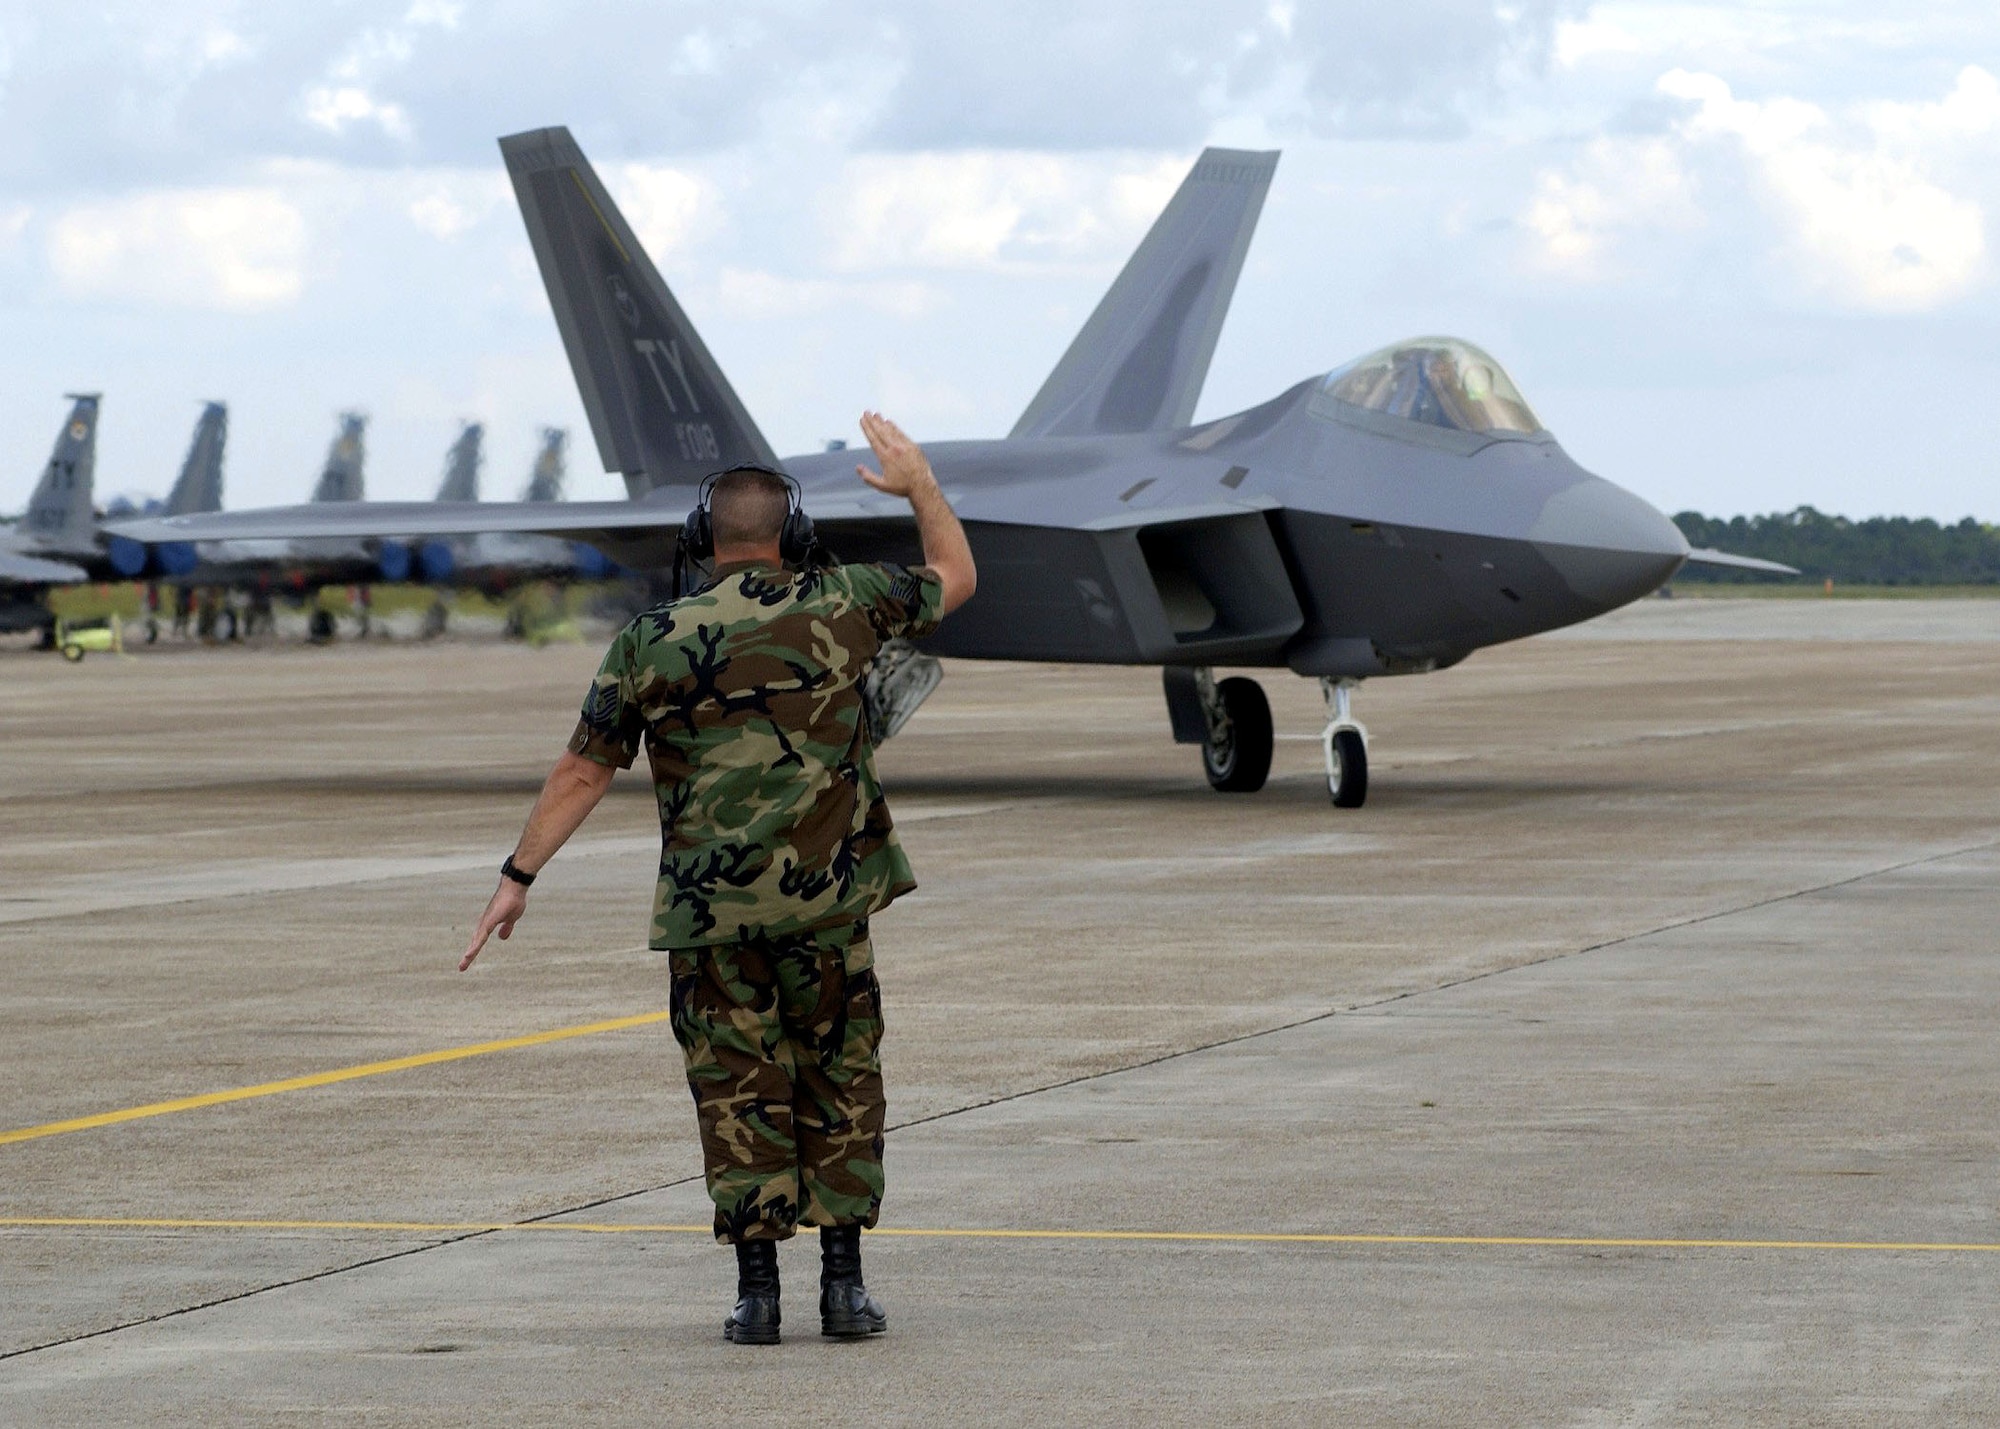 TYNDALL AIR FORCE BASE, Fla. -- Tech. Sgt. Jeff Simpson guides Raptor number 18 to its parking spot. Raptor 18 is the first operational F/A-22 Raptor delivered to the Air Force’s F/A-22 schoolhouse here. The Raptor will eventually replace the F-15 Eagle and sets the foundation for the next generation of combat-fighter pilots. (U.S. Air Force photo by Steve Wallace)
